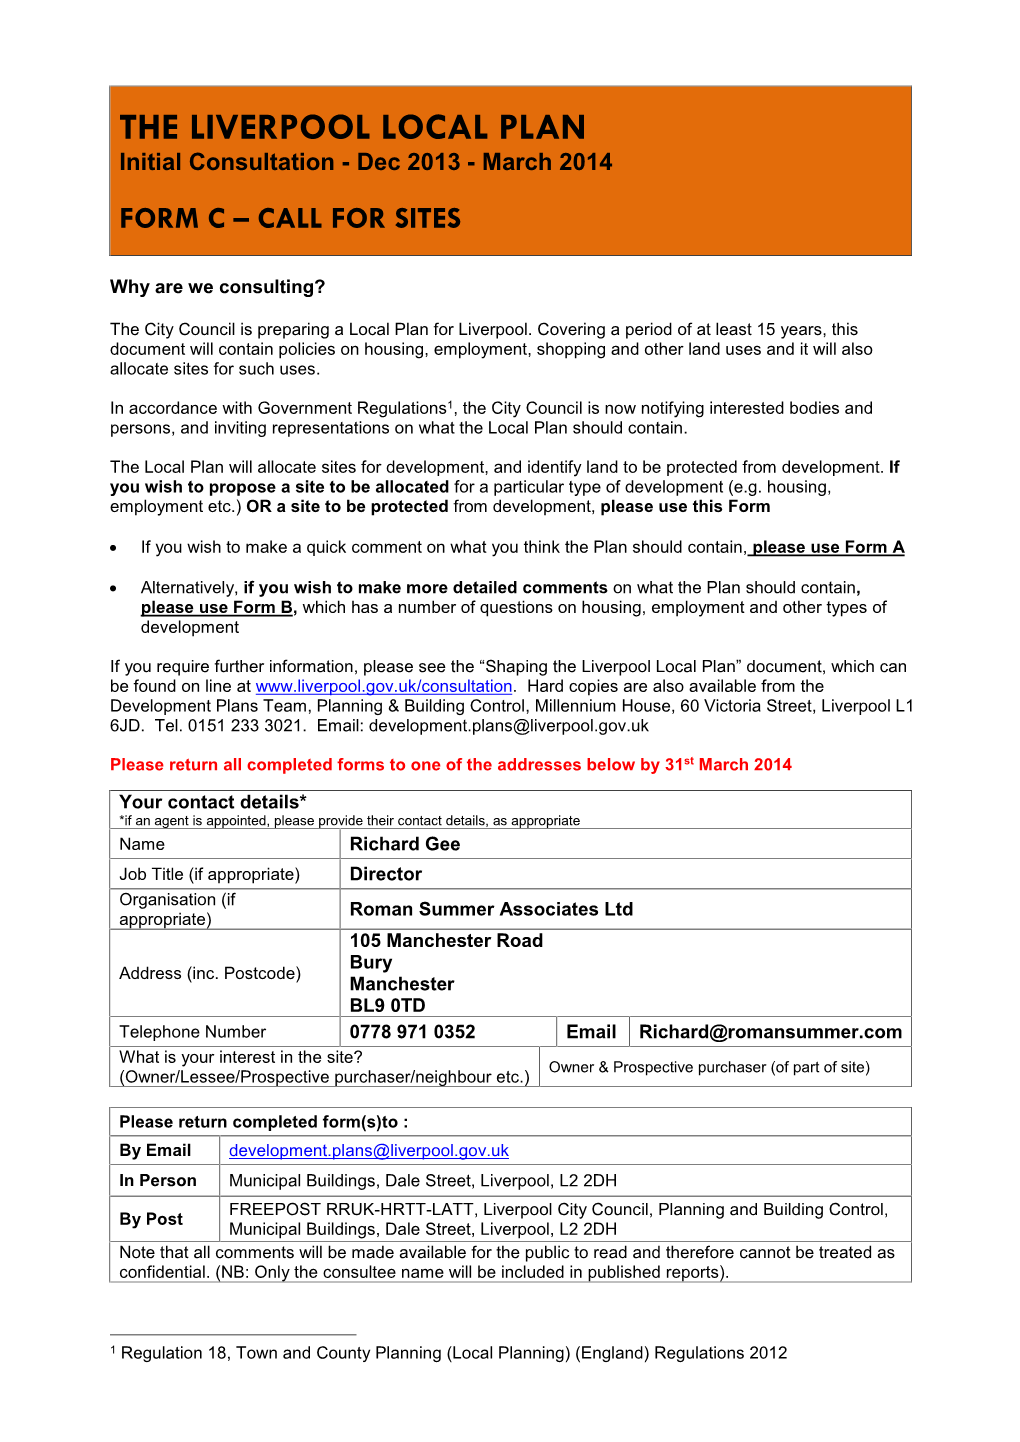 THE LIVERPOOL LOCAL PLAN Initial Consultation - Dec 2013 - March 2014 FORM C – CALL for SITES